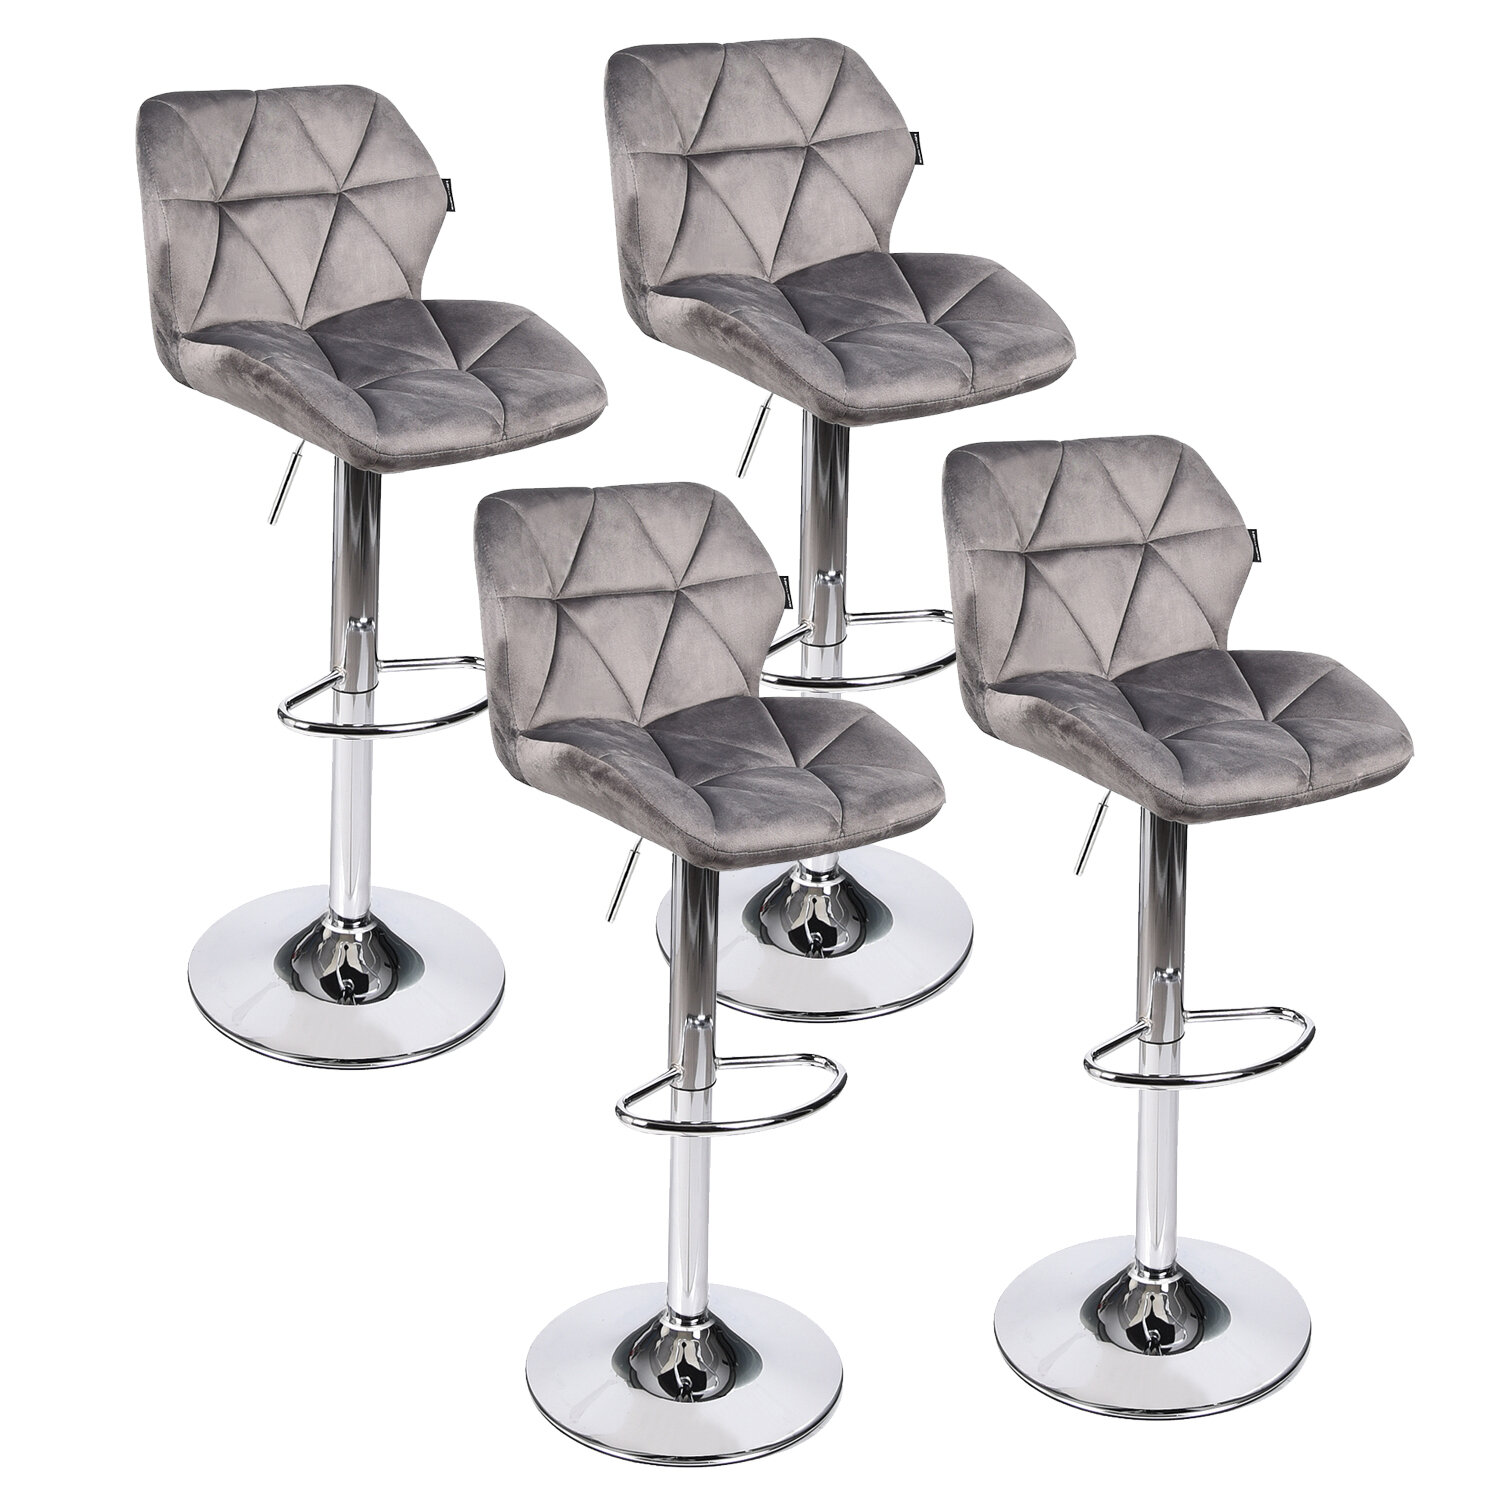 Set Of 4 Flannel Pub Bar Stools Adjustable Swivel Seat Counter Chair Dining USA 